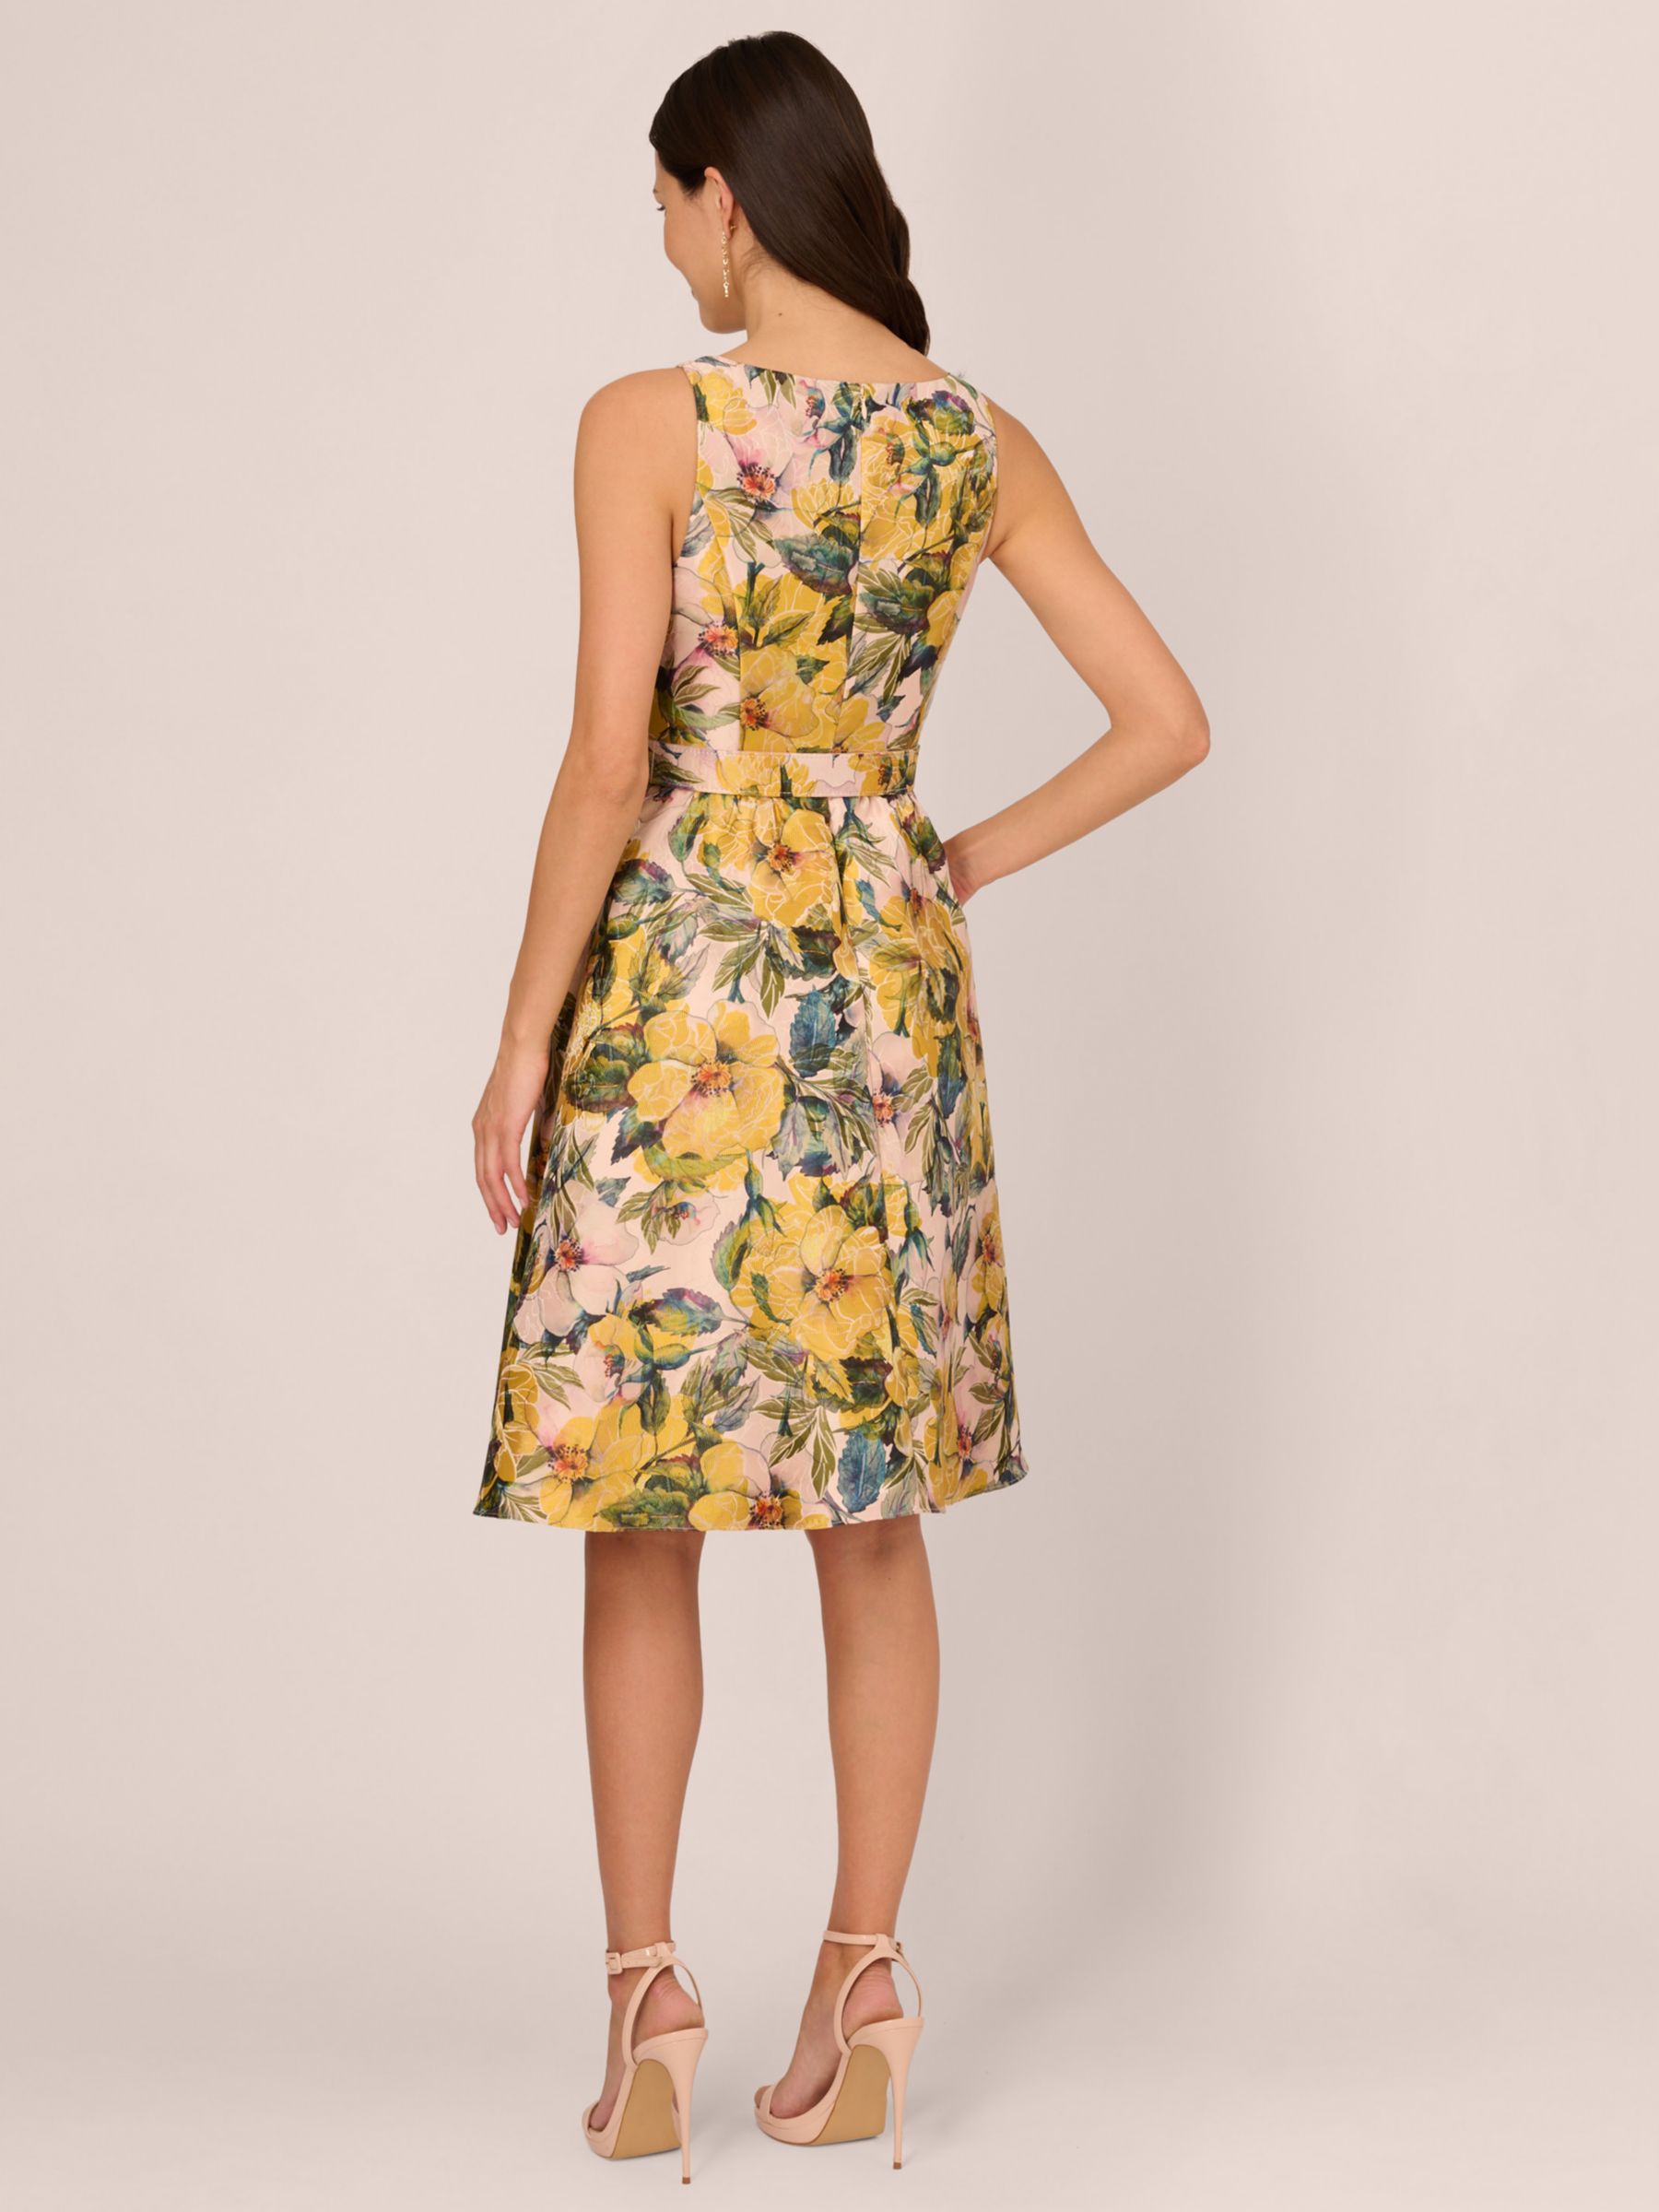 Adrianna Papell Jacquard Floral Flared Dress, Yellow/Multi, 18